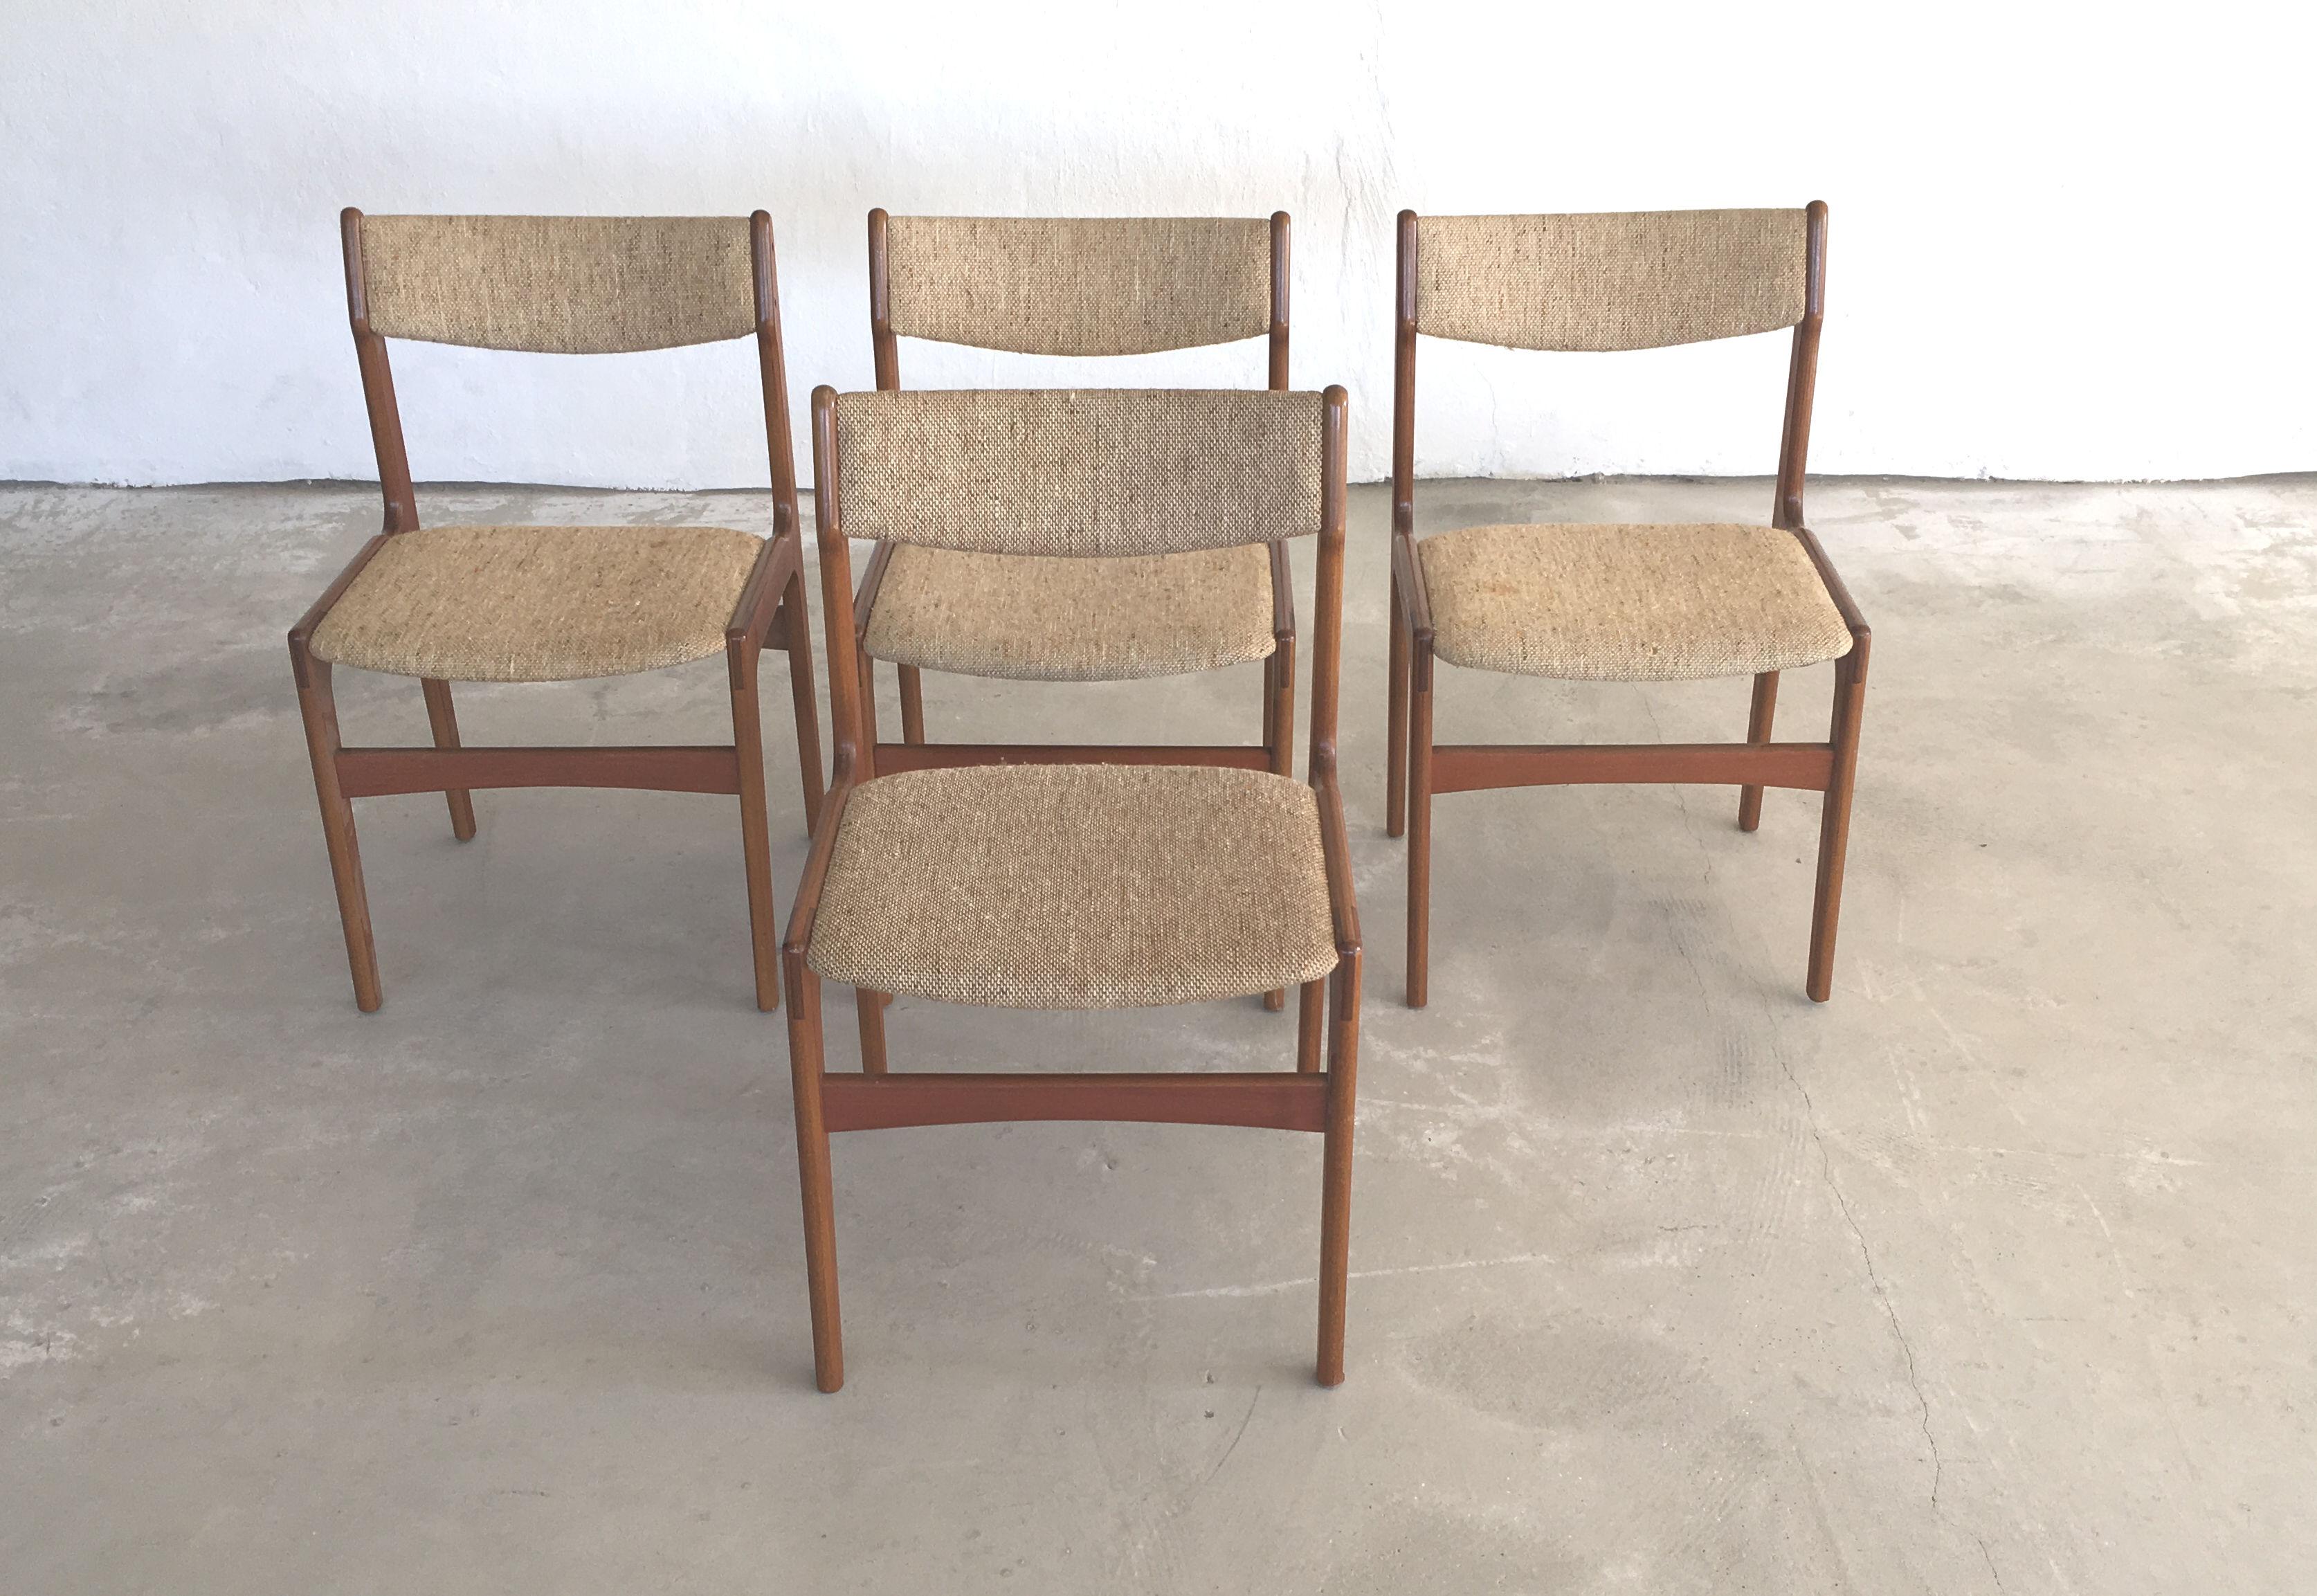 Set of four teak dining chairs designed by Erik Buch.

The chairs are as all of Erik Buchs chairs comfortable and are in very good condition.

The chairs have been restored and refinished by our cabinetmaker to ensure that they are in very good